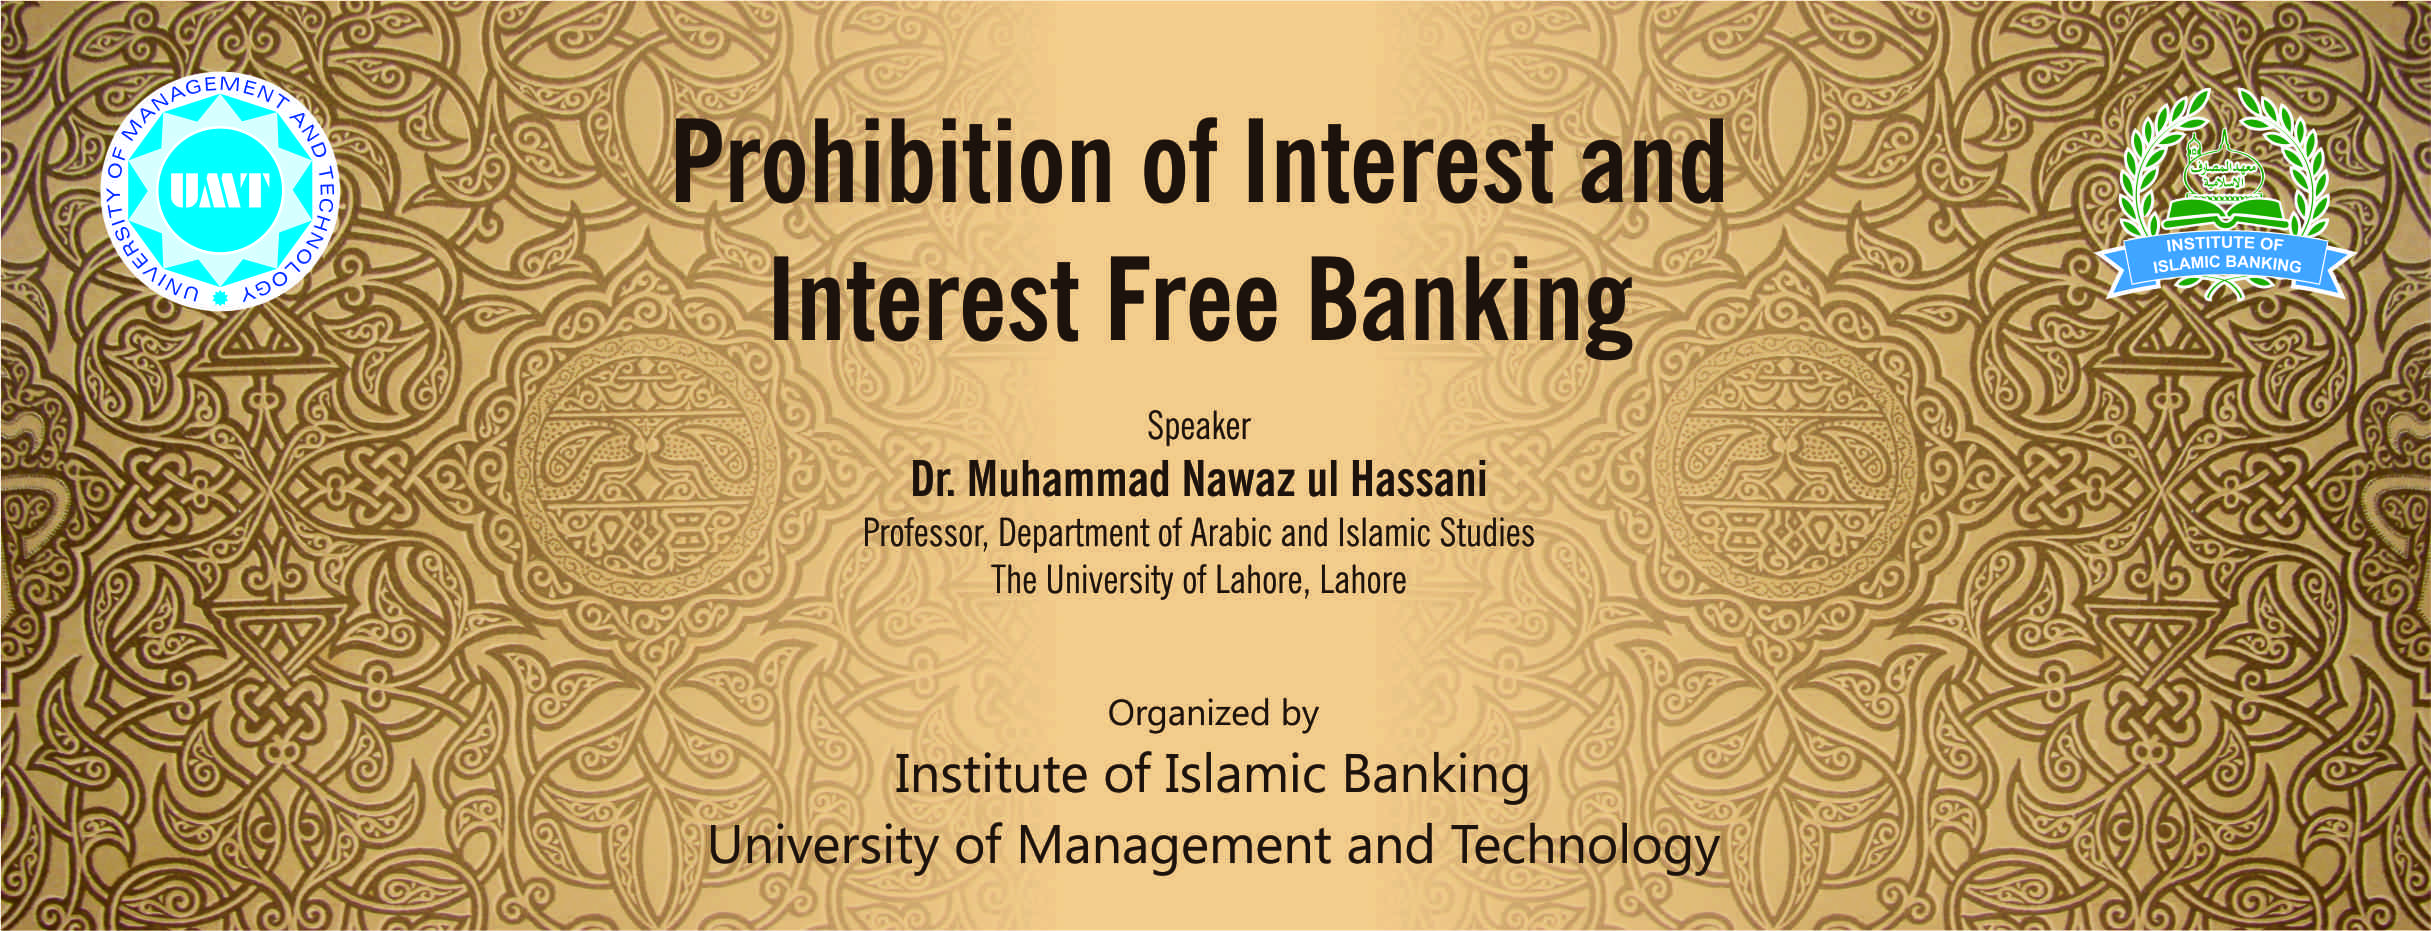 Prohibition of Interest and Interest Free Banking